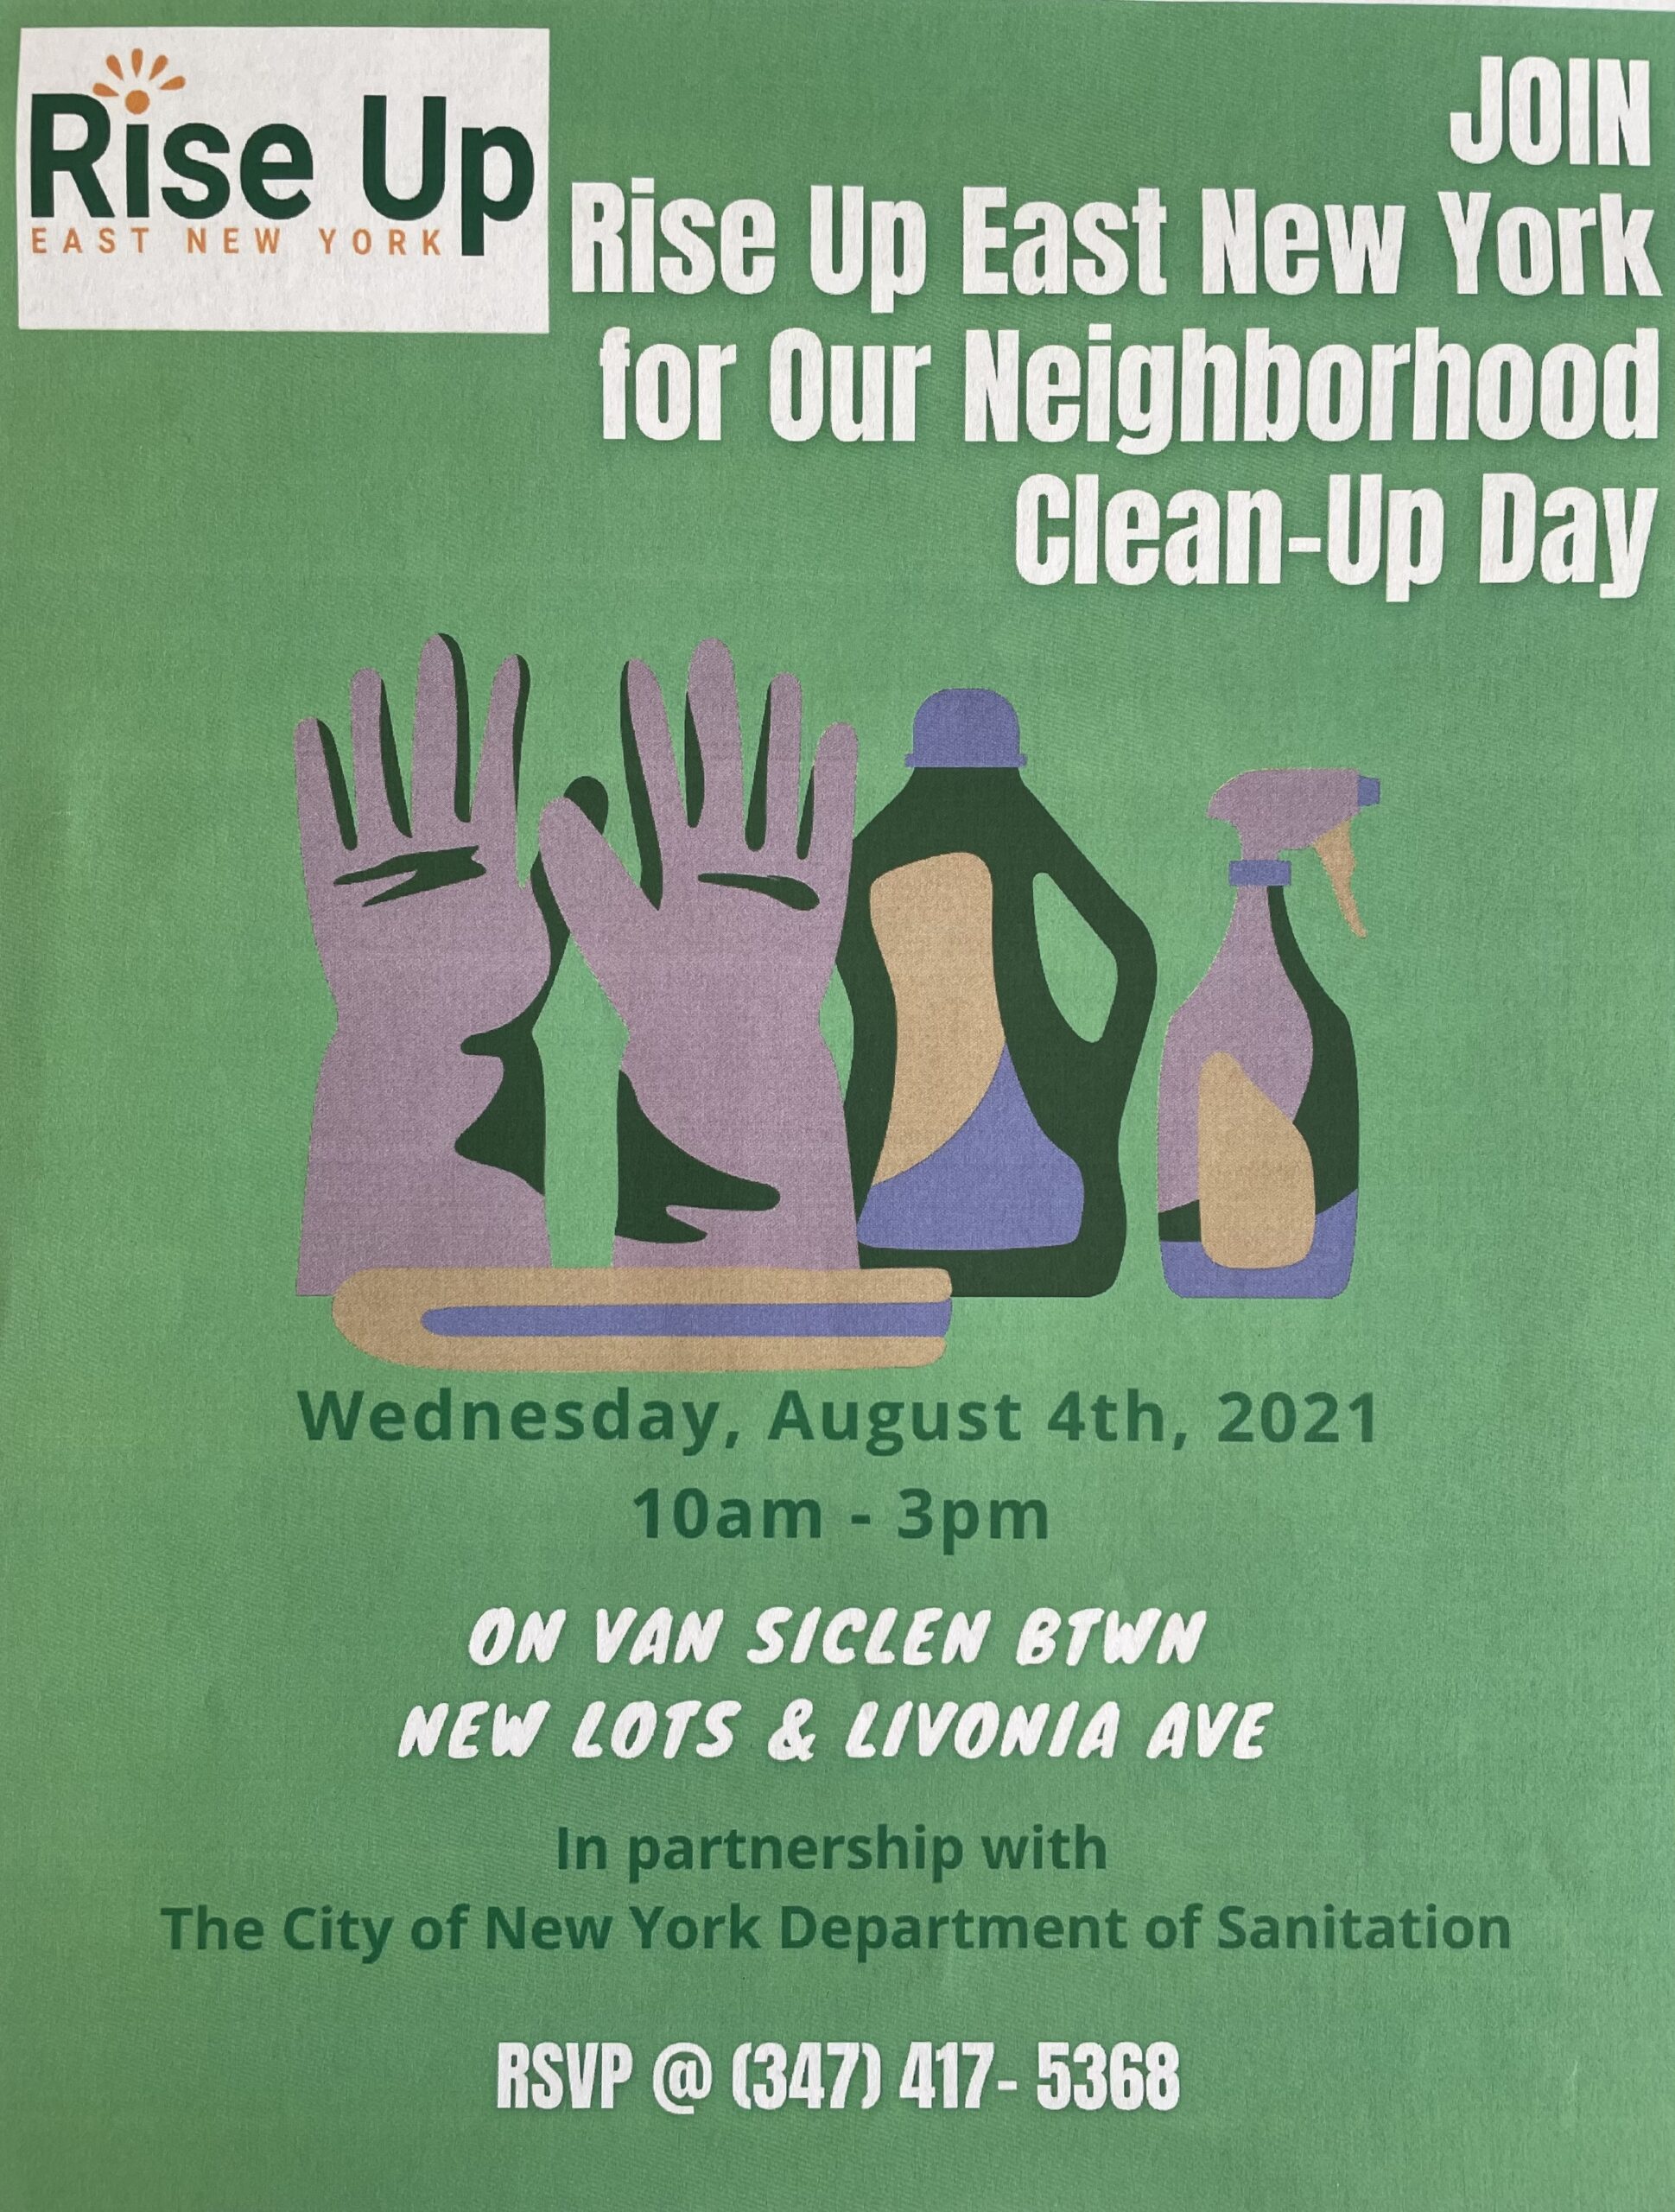 Rise Up ENY Clean Up Van Siclen Ave.